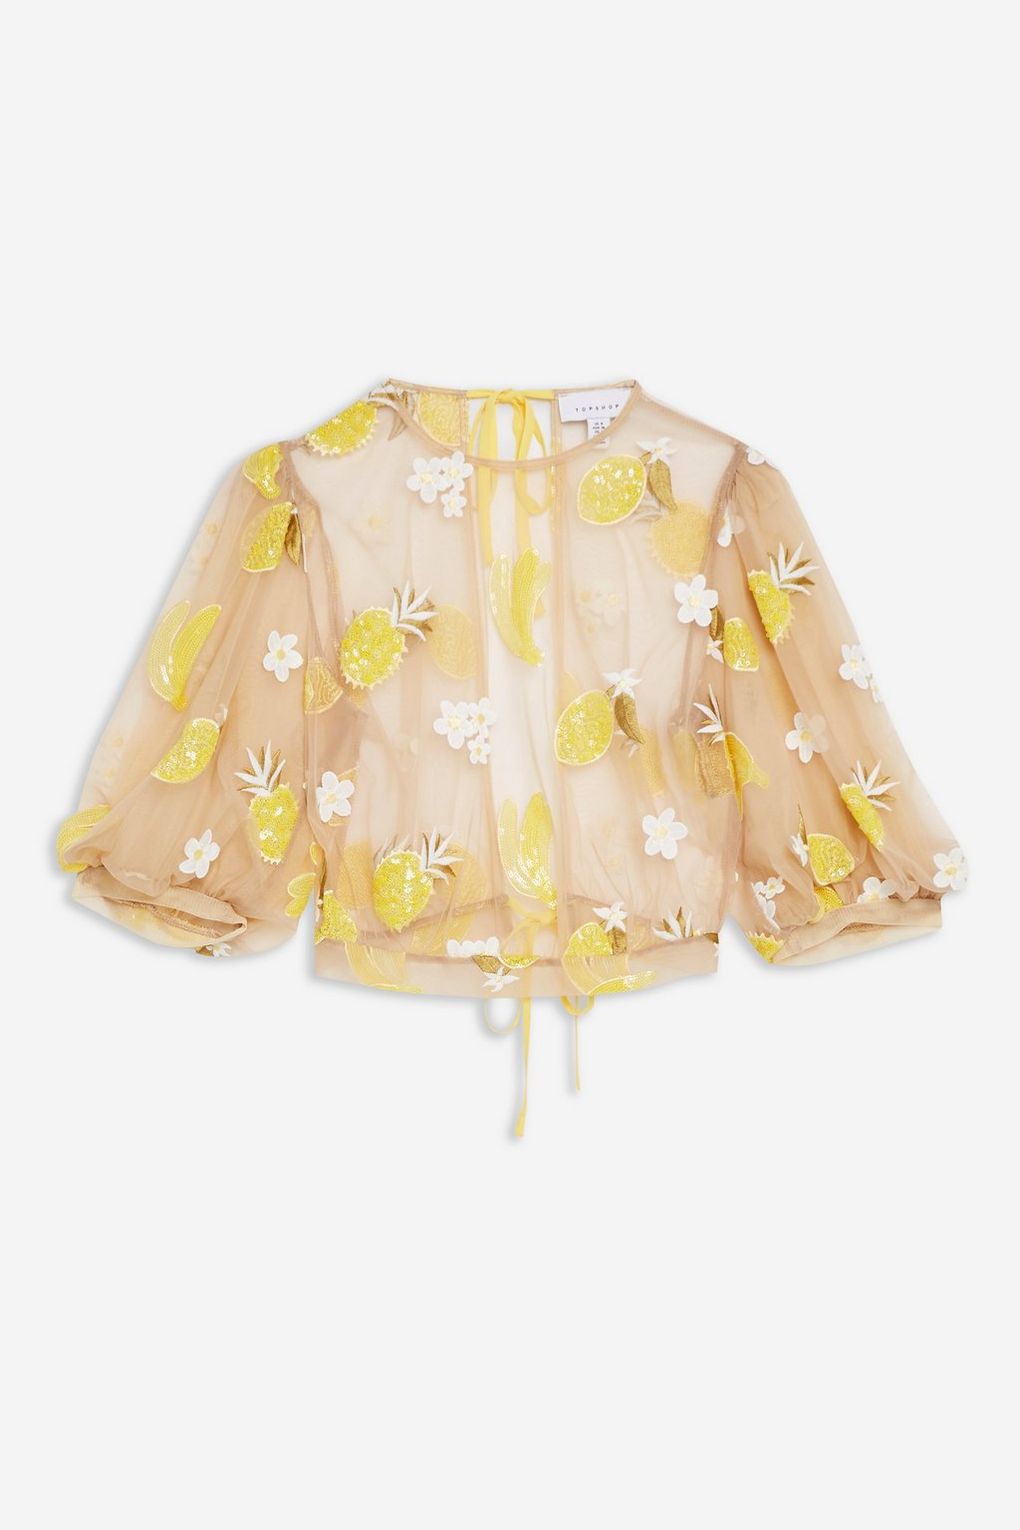 Sheer Joy: These 11 Organza Blouses Will Get You Ready For Sunny Days